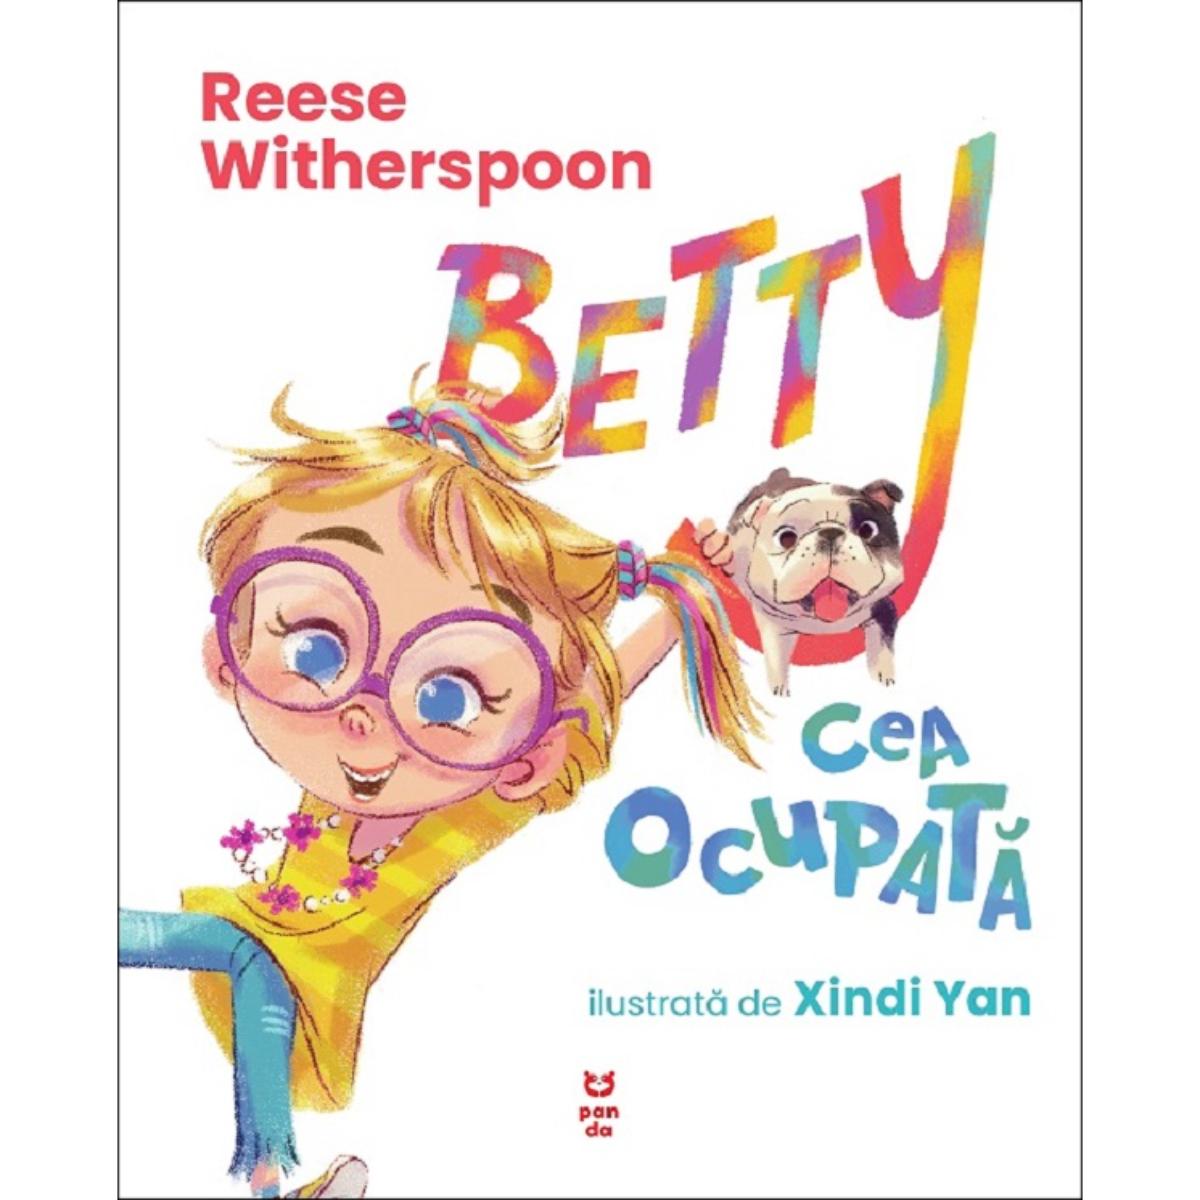 Betty cea ocupata, Reese Witherspoon